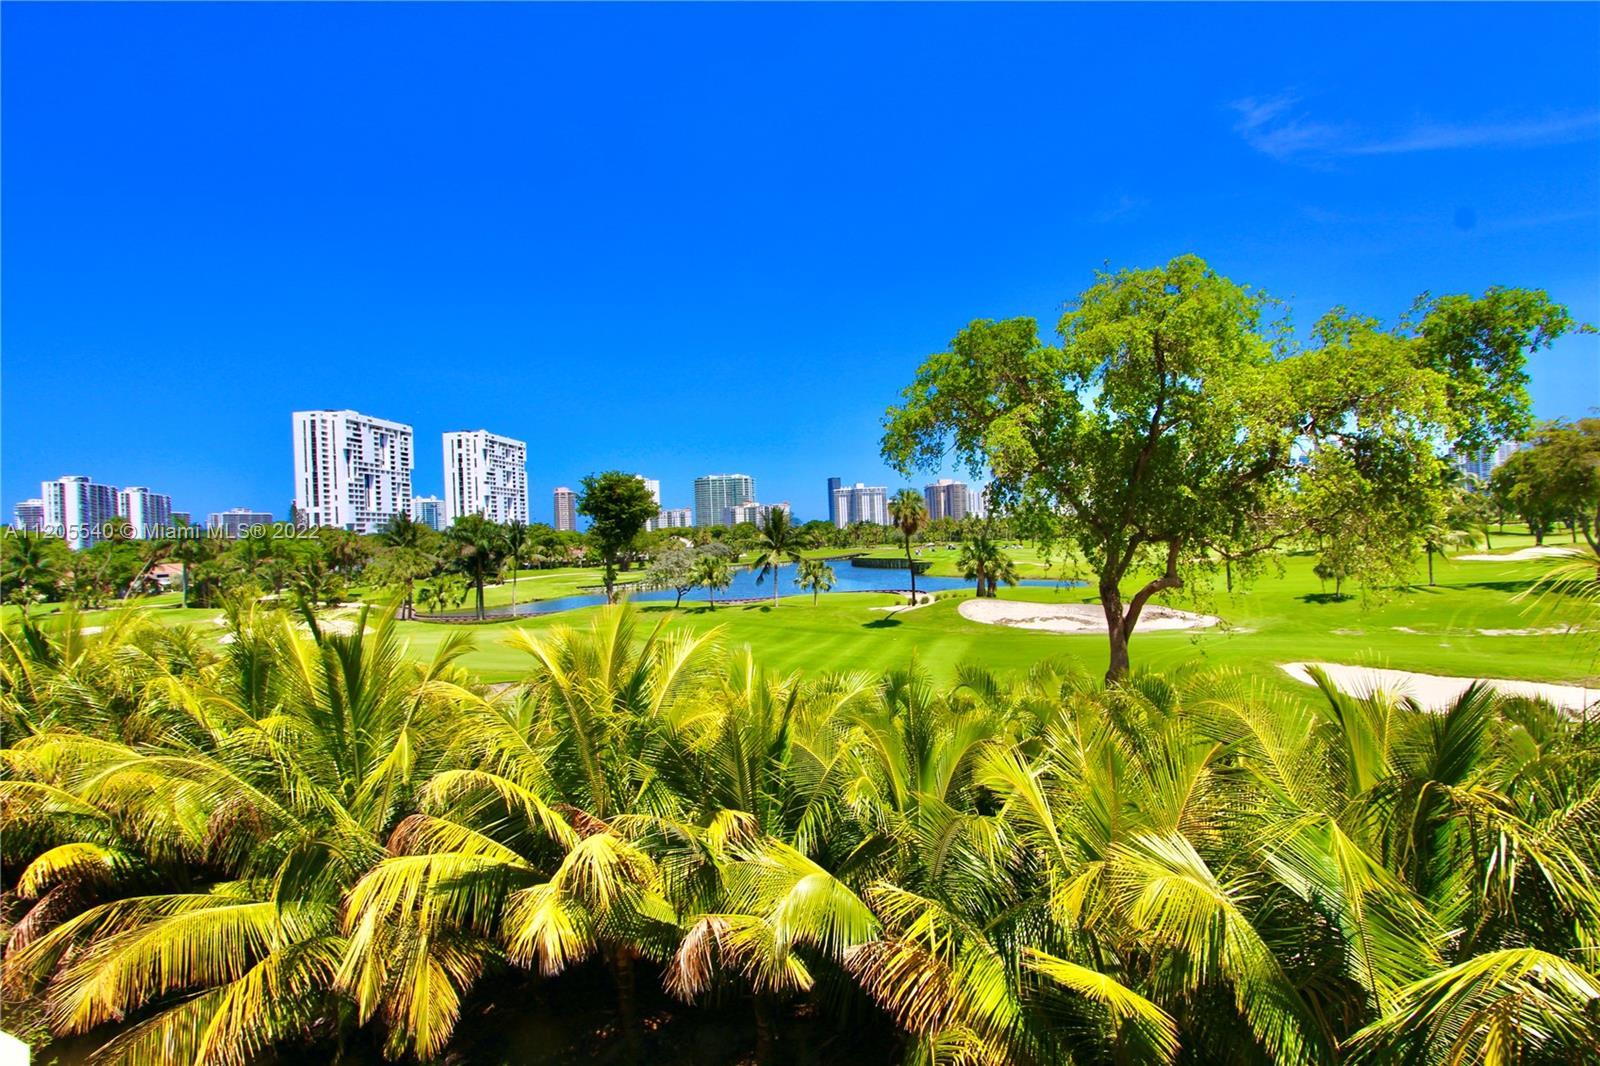 AVENTURA LIFESTYLE AWAITS FOR YOU AT THIS LOVELY 1 BEDROOM 1.5 BATHS IN CORONADO.  THE BUILDING HAS 